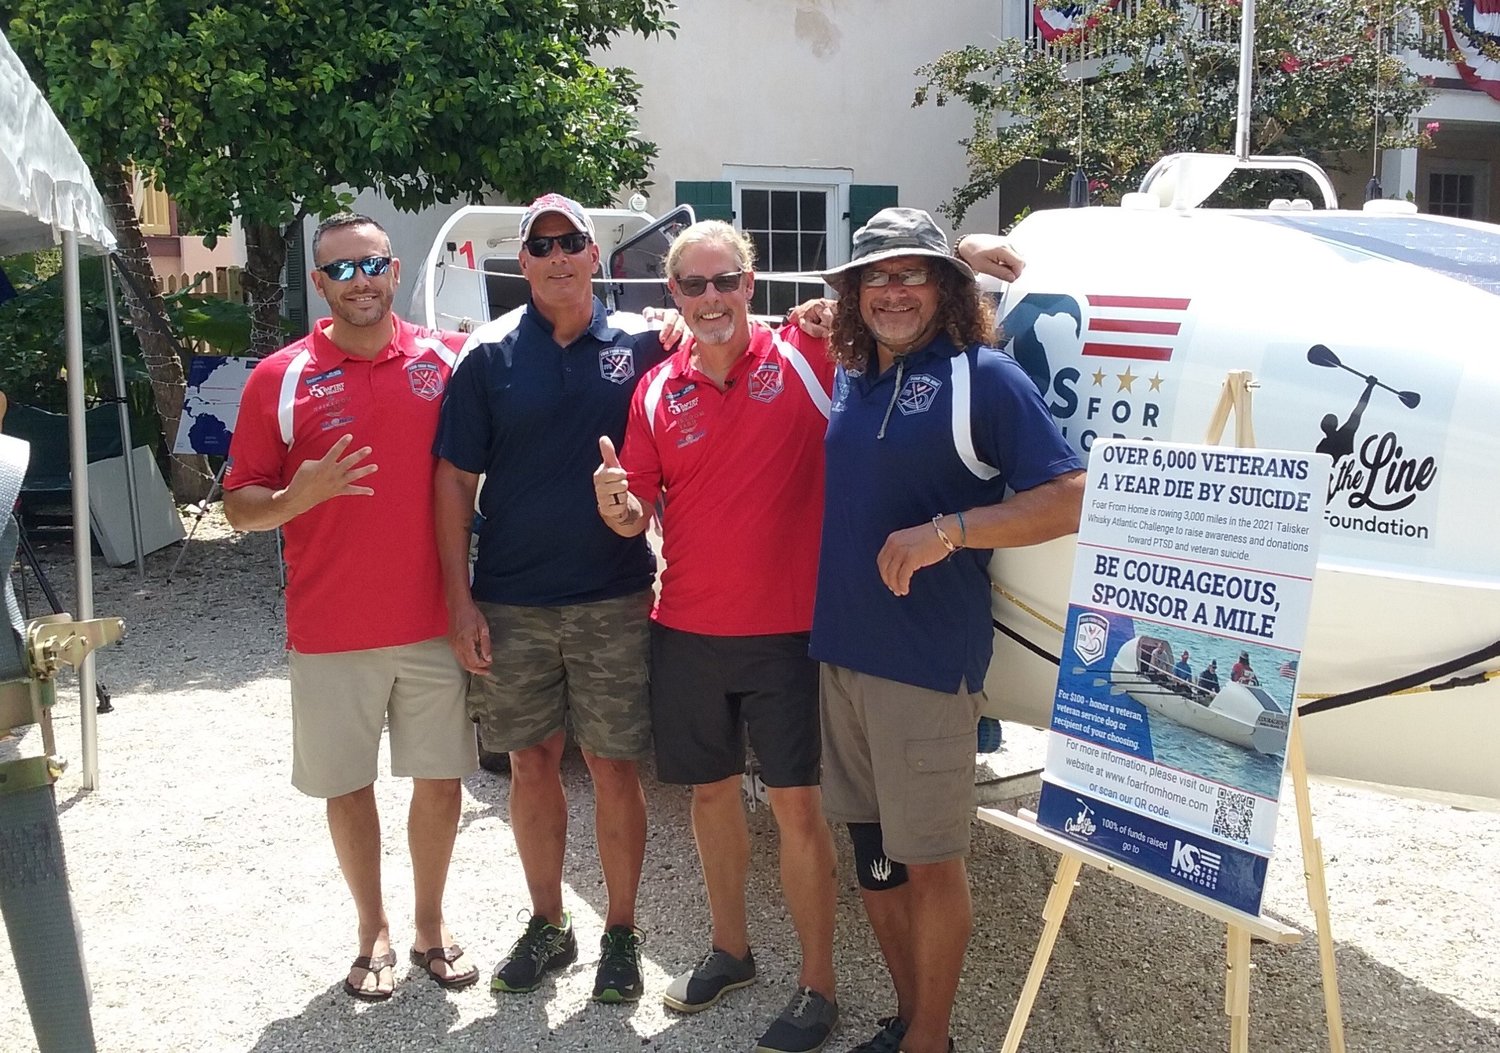 The Foar From Home team is comprised of, from left, Cameron Hansen, Billy Cimino, Hupp Huppmann and Paul Lore. The veterans are planning to row a boat across the Atlantic Ocean.